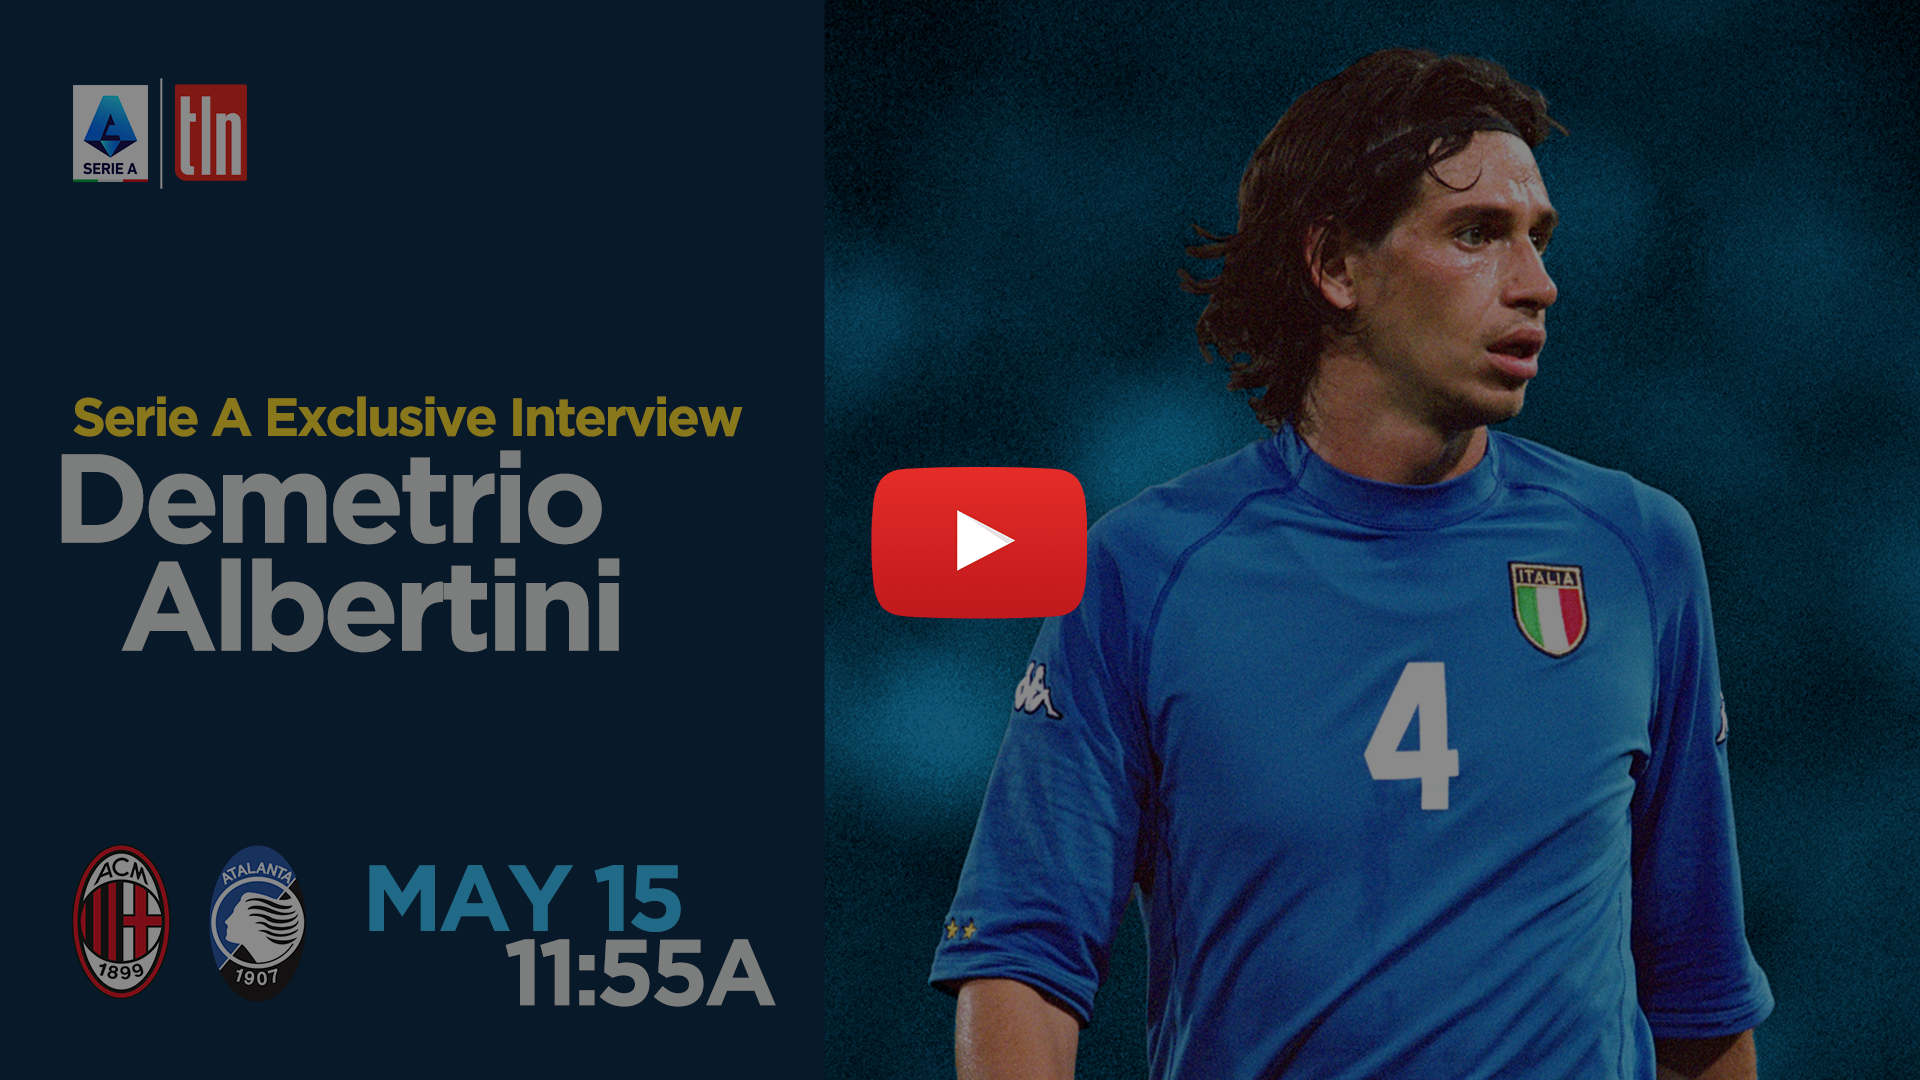 In this exclusive interview between Serie A and Demetrio Albertini, the former defensive midfielder speaks about his career and previews Milan vs Atalanta, taking place on 15 May 2022.